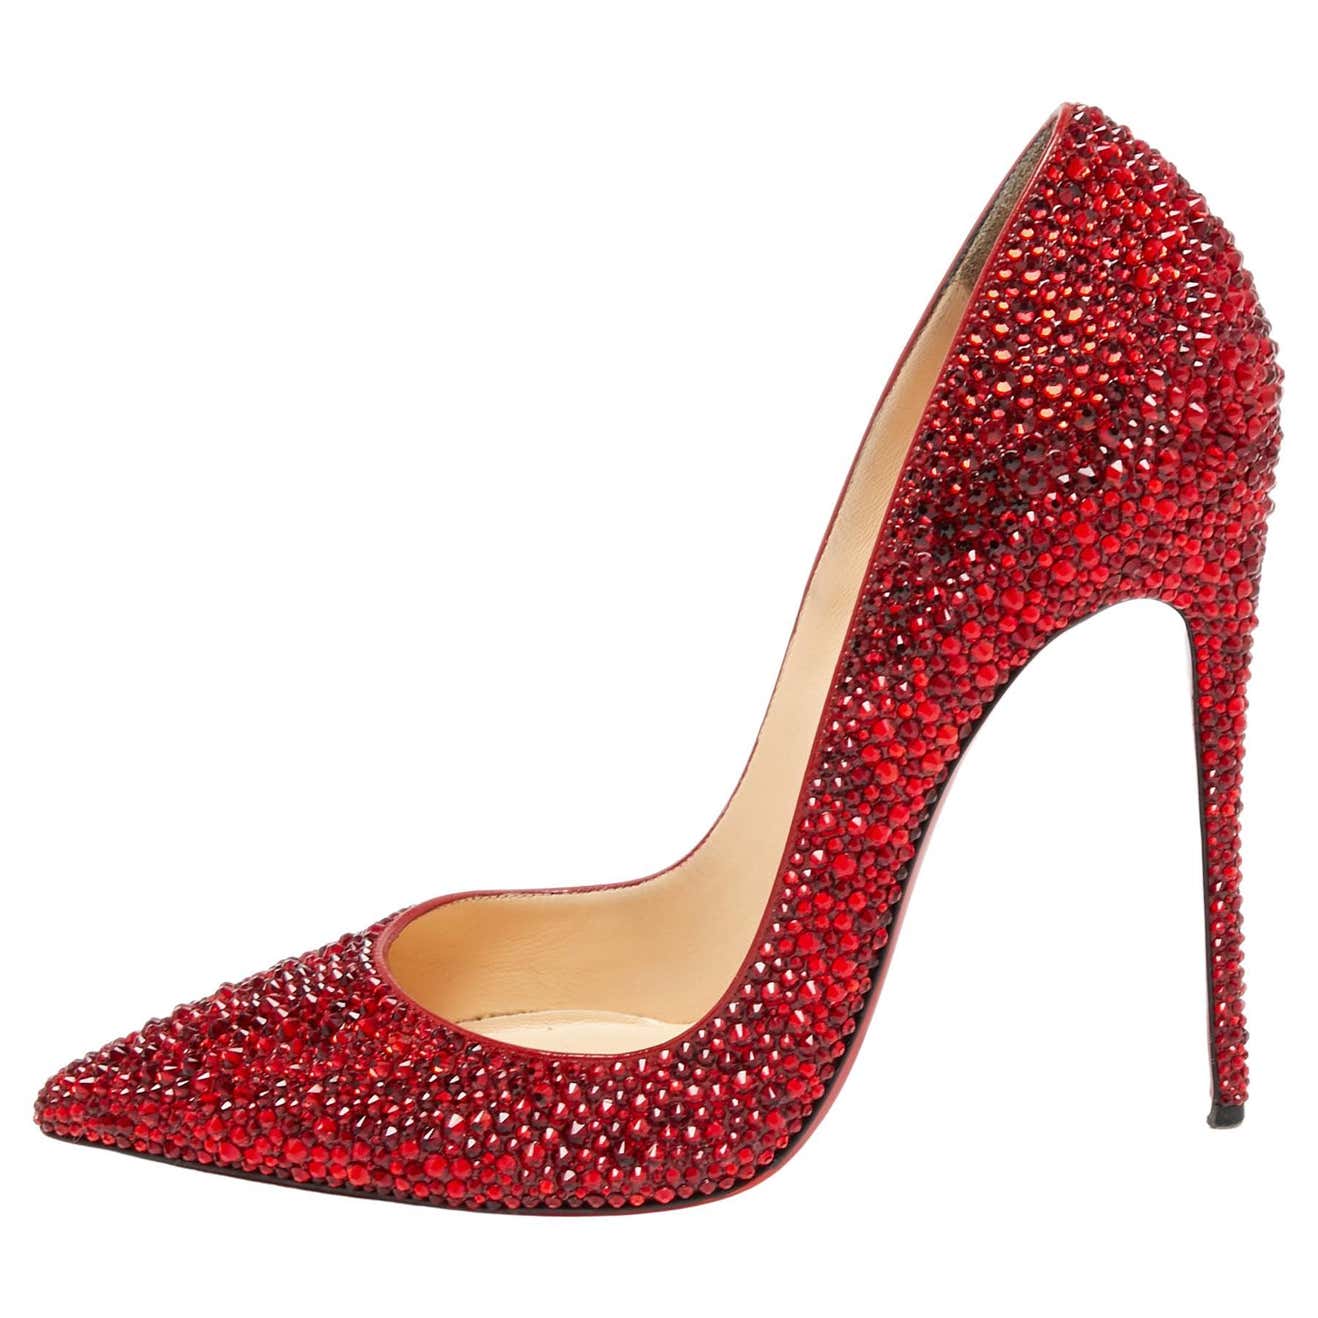 Christian Louboutin Red Leather Strass Degrade So Kate Pumps Size 39 ...